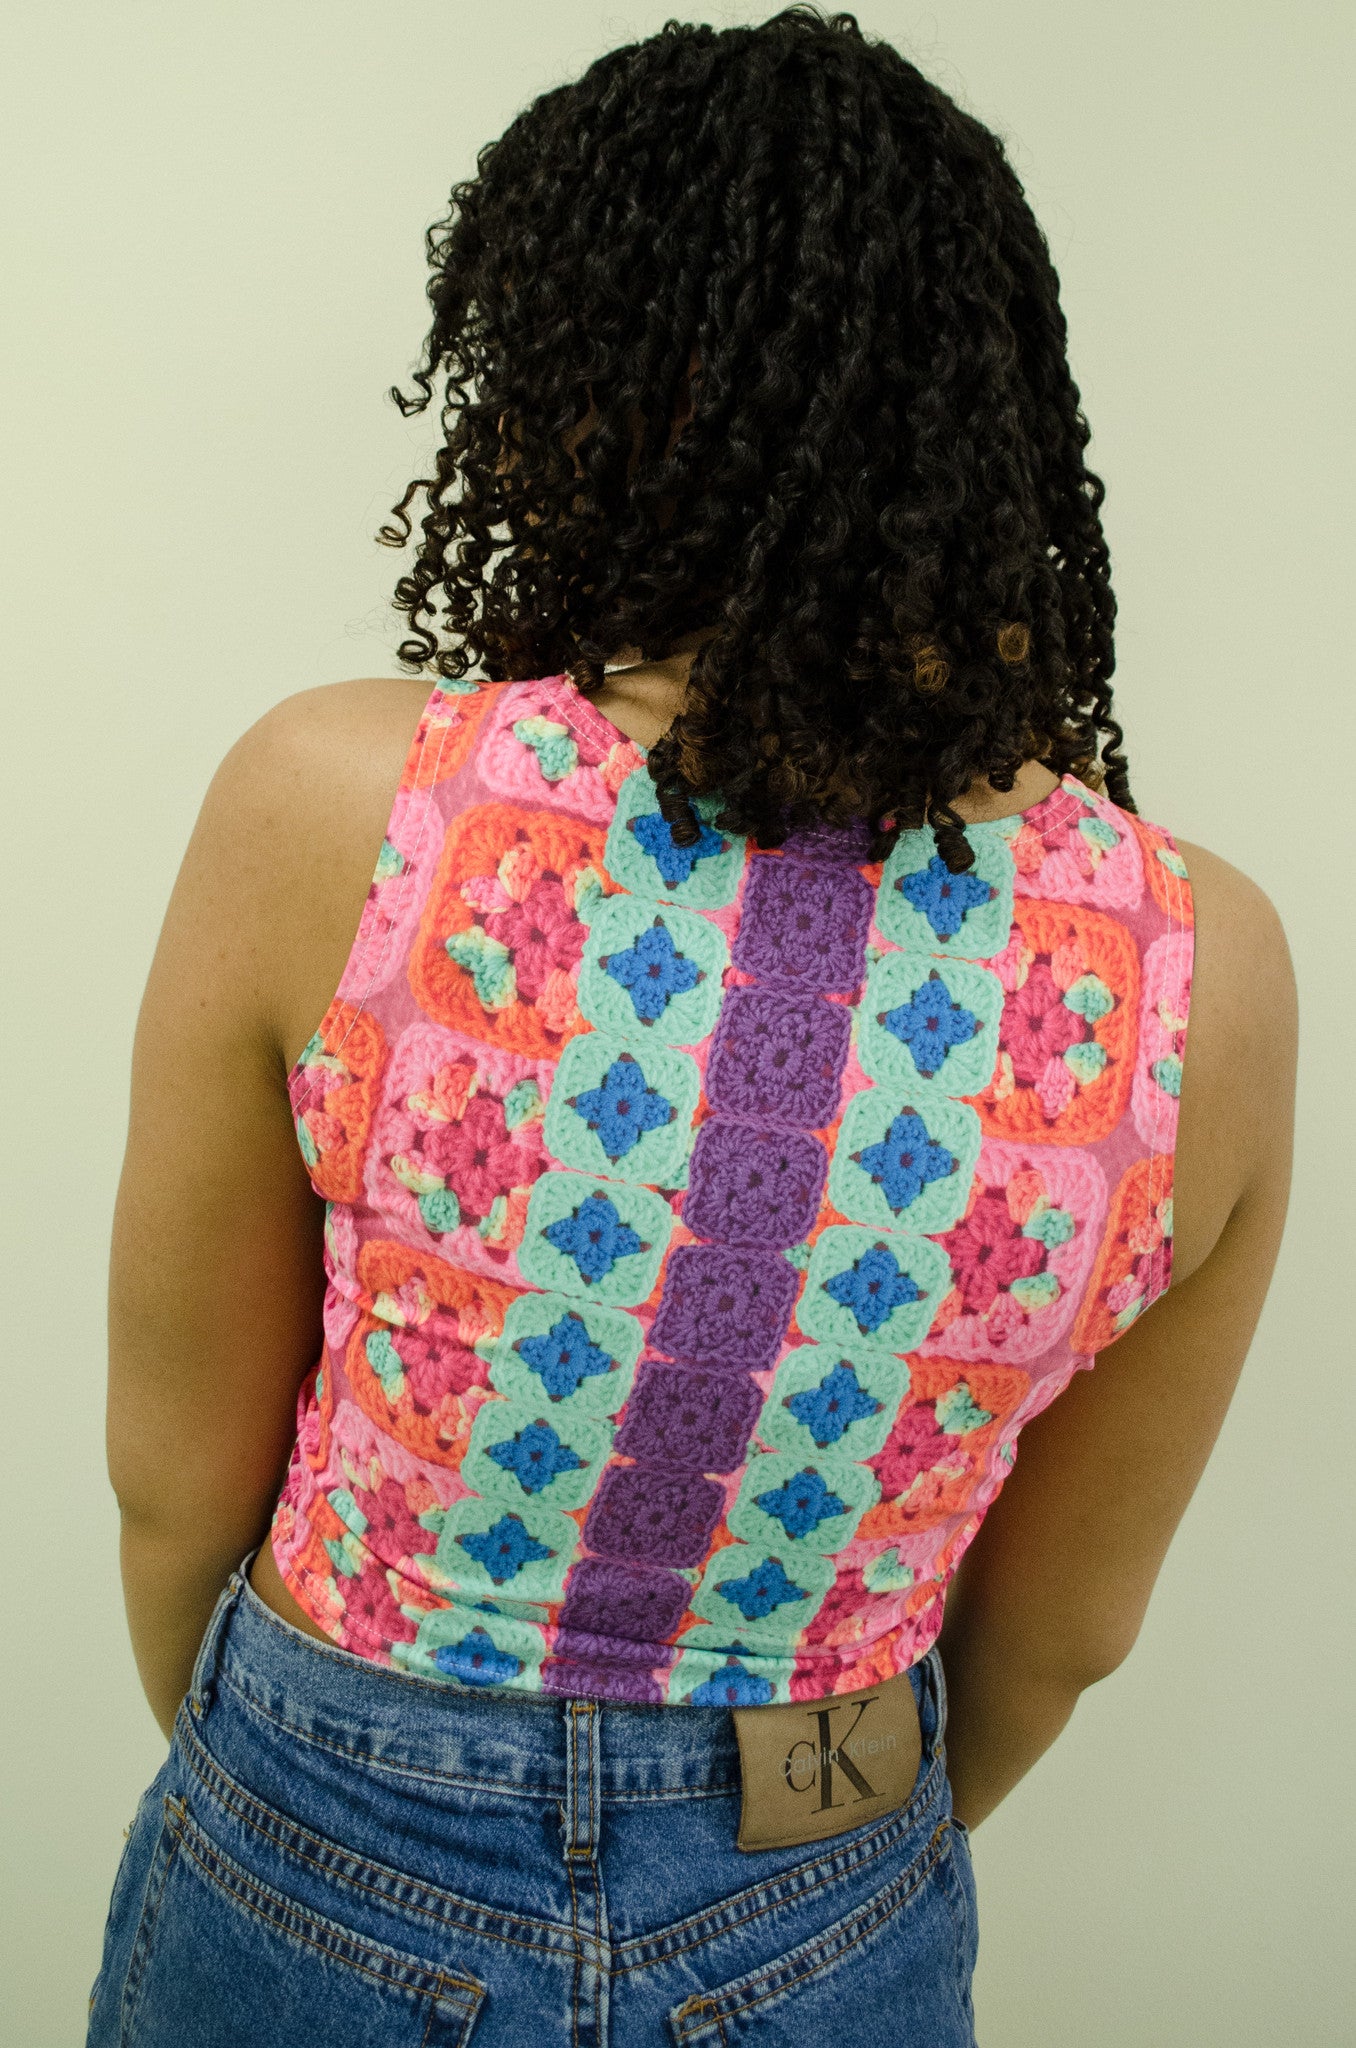 Snapdragon Brand Clothing Granny Square Crochet Print neon crop top cropped sleeveless shirt in style Playa Daisy features a vintage psychedelic boho feel and a rainbow of colors. Made of comfortable spandex. Daisies